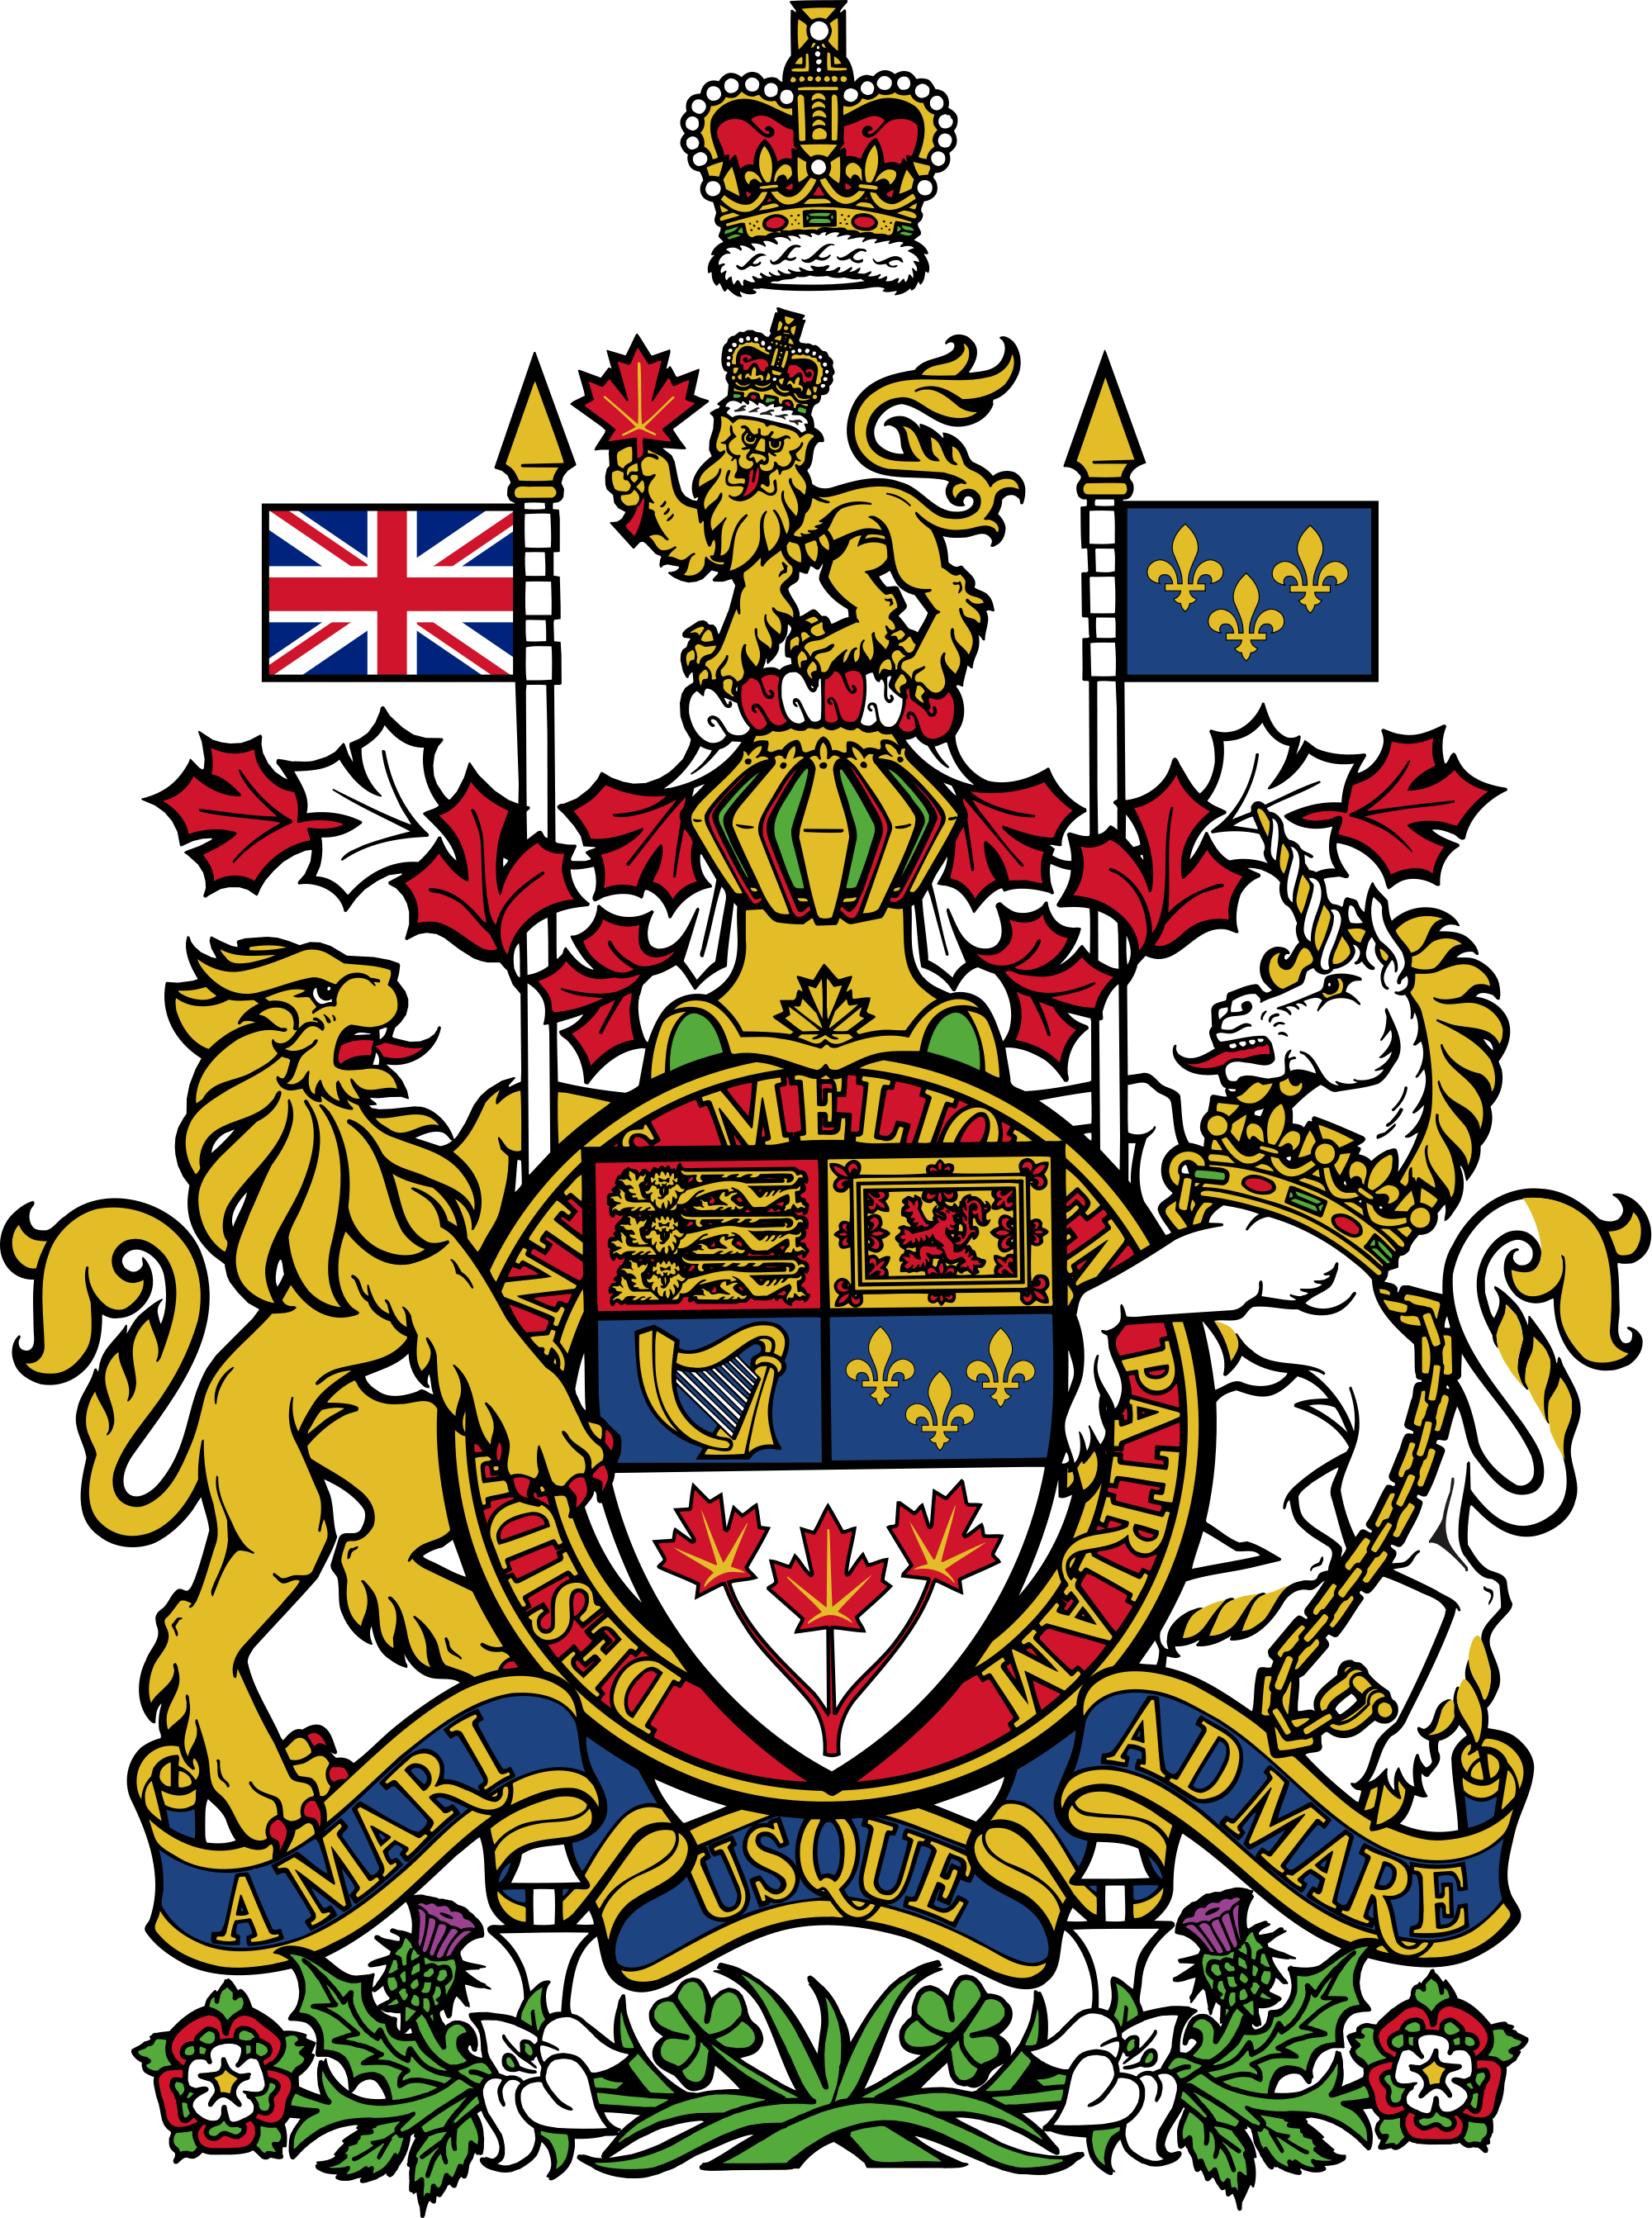 Arms of Canada